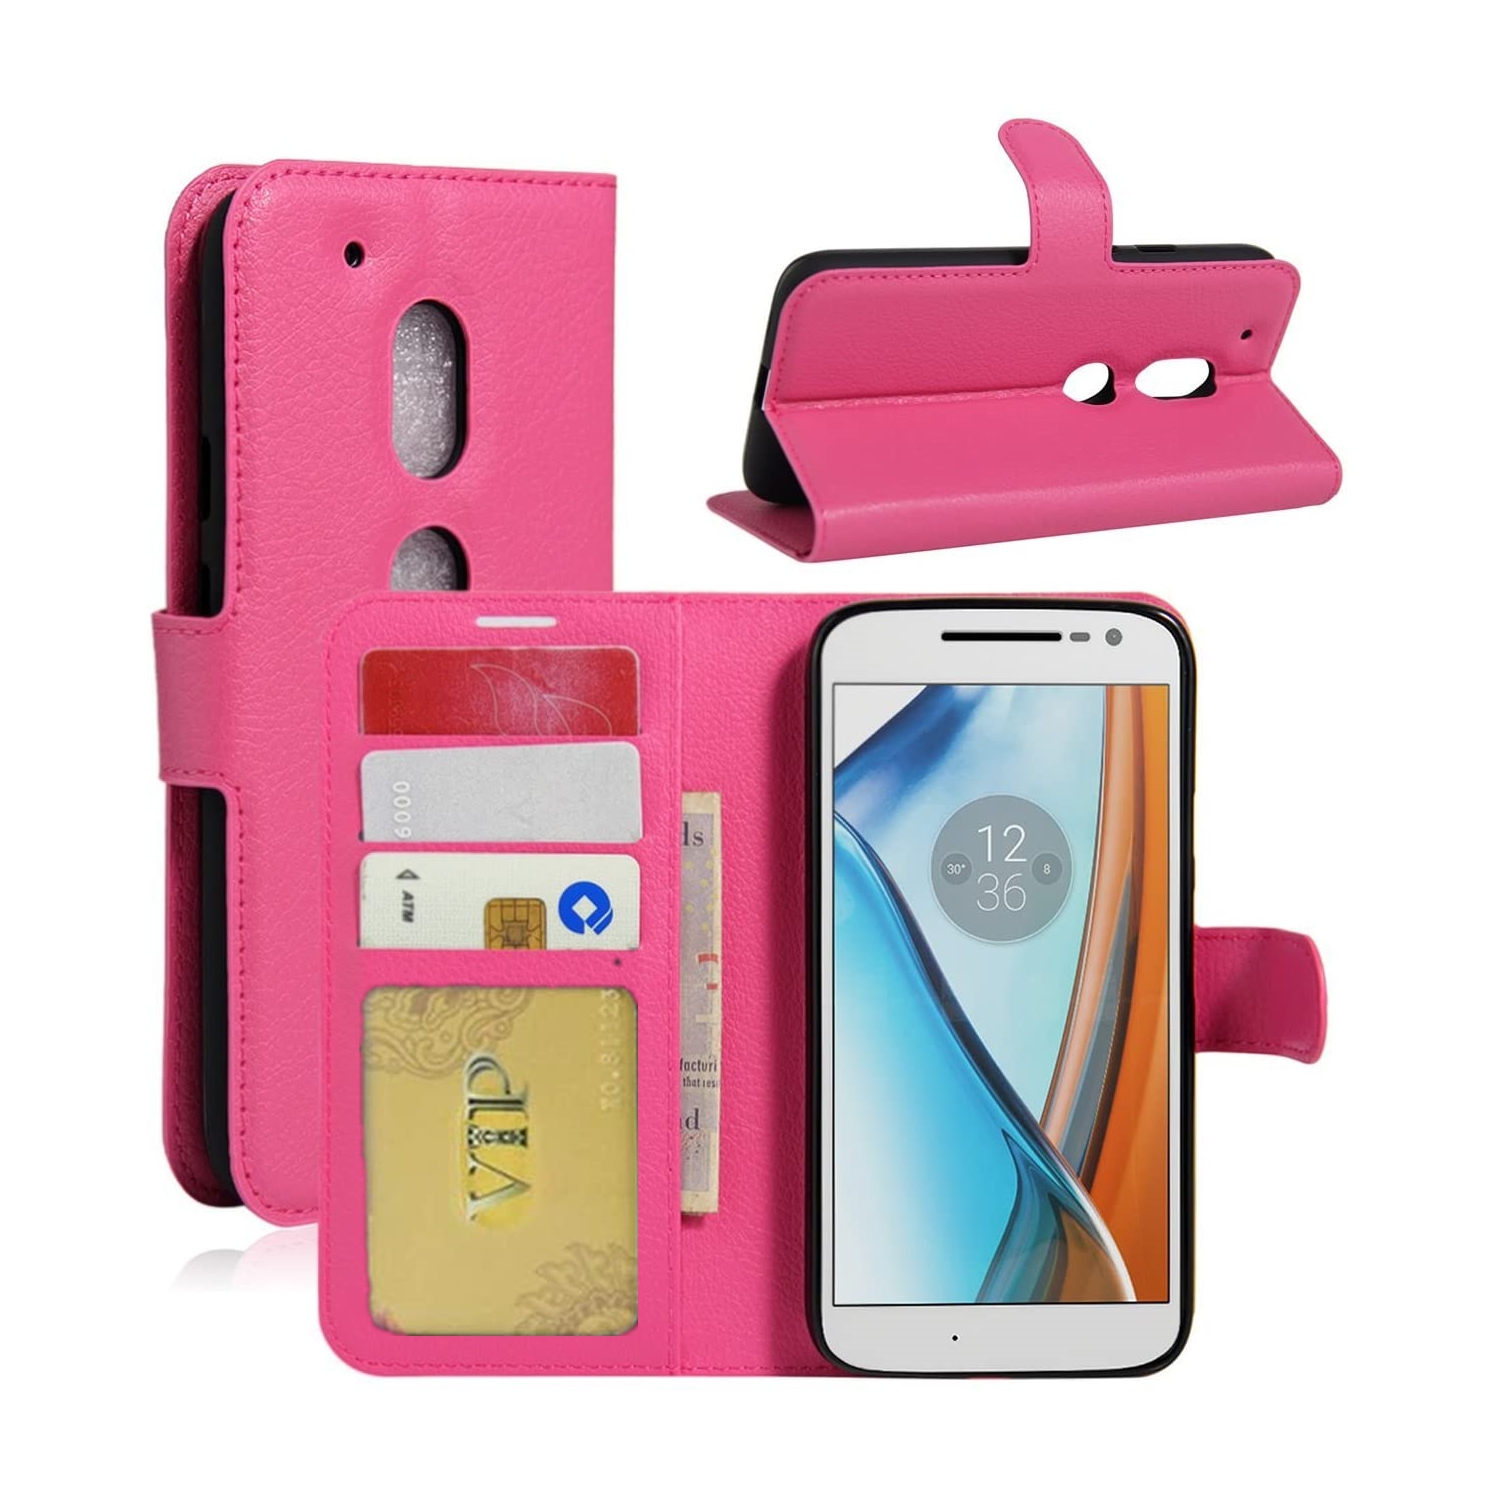 【CSmart】 Magnetic Card Slot Leather Folio Wallet Flip Case Cover for Motorola Moto G6 Play, Hot Pink